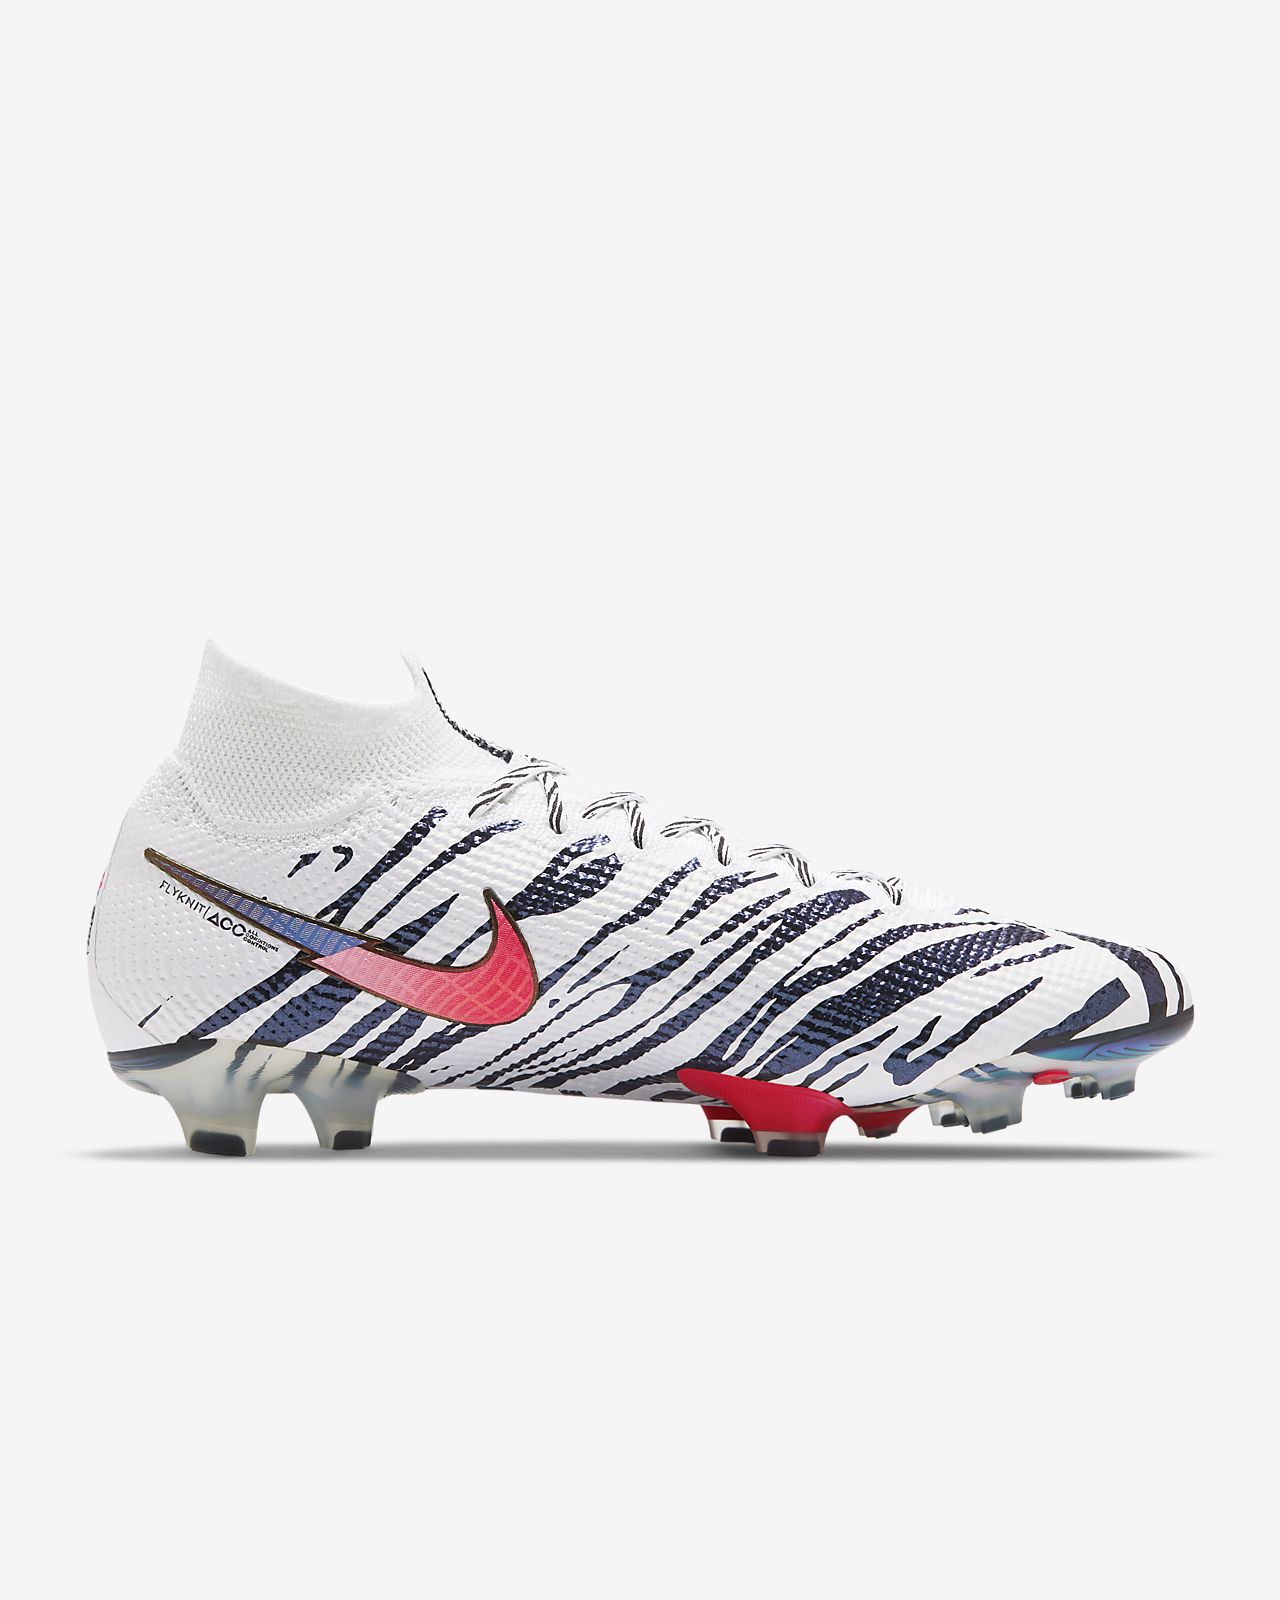 Nike Superfly 6 Elite FG Soccer Cleats Free Shipping.